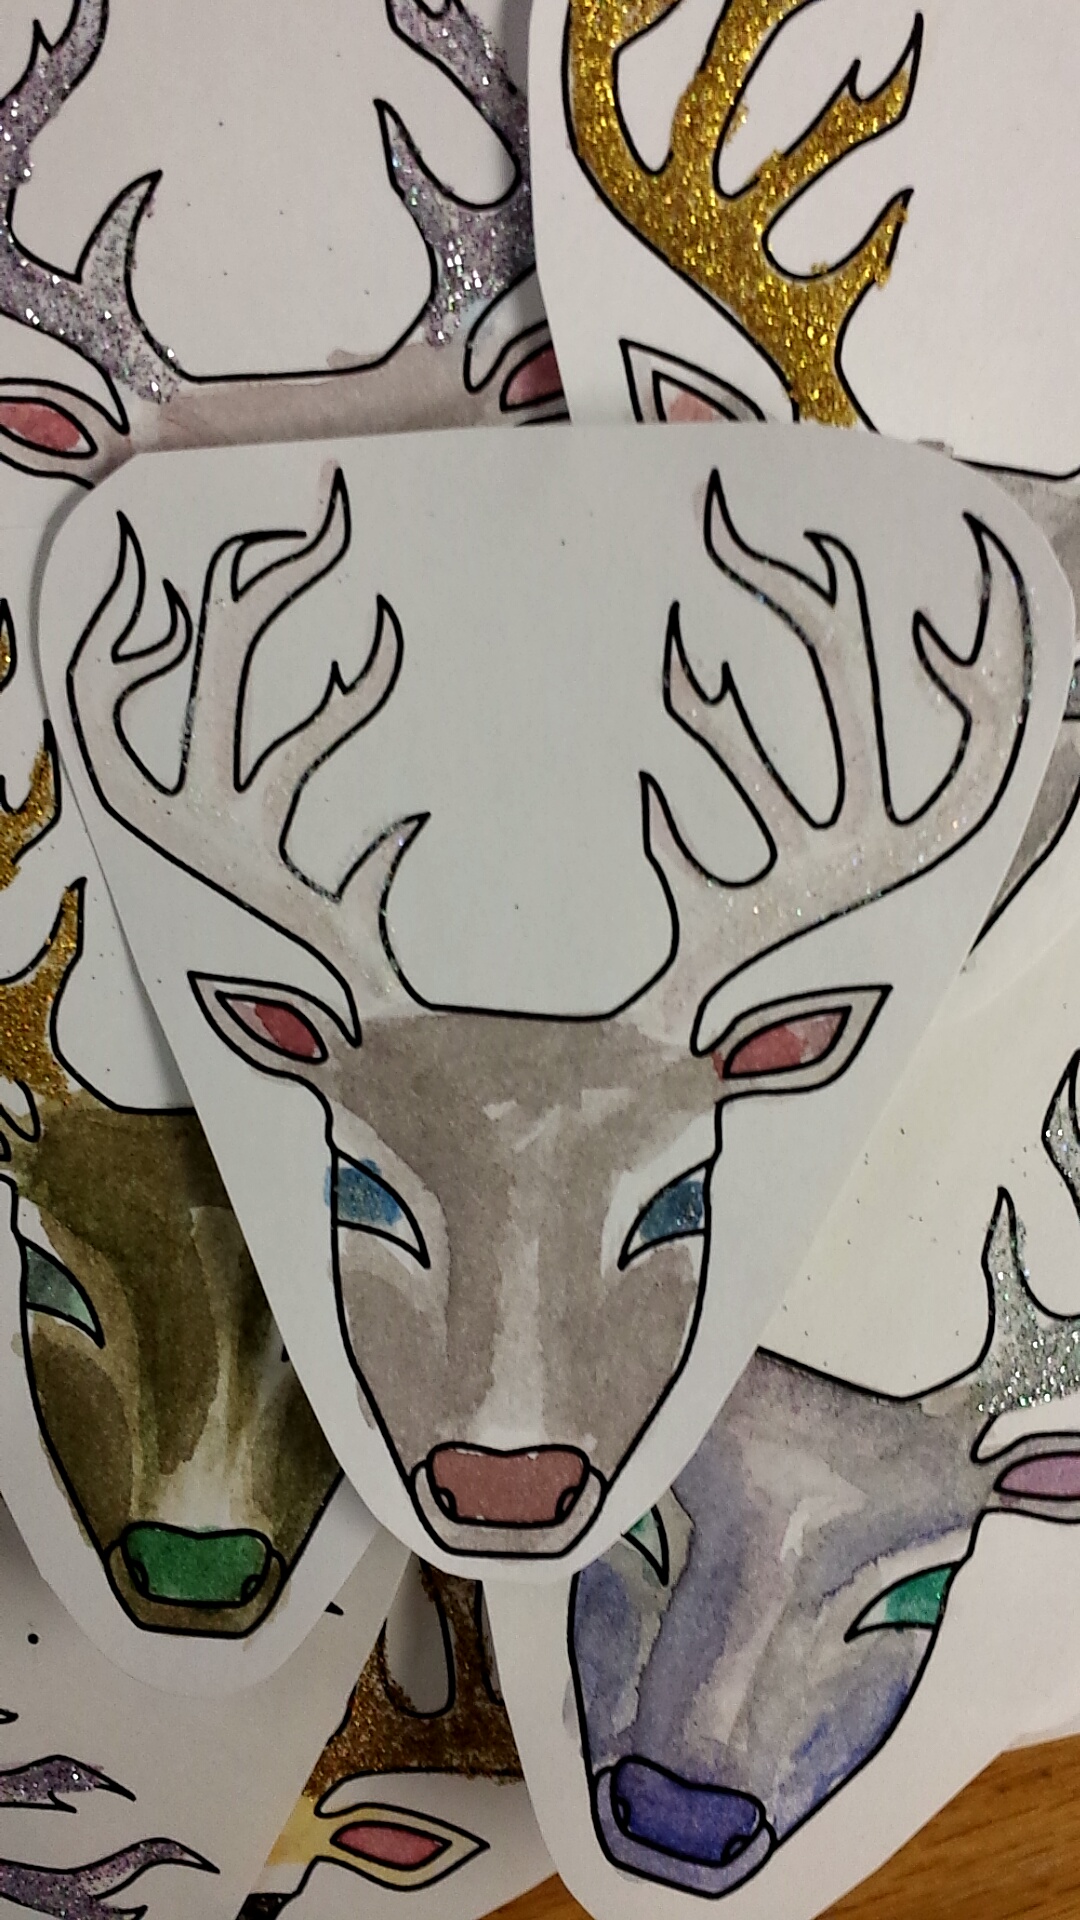 Many deer were created and painted.